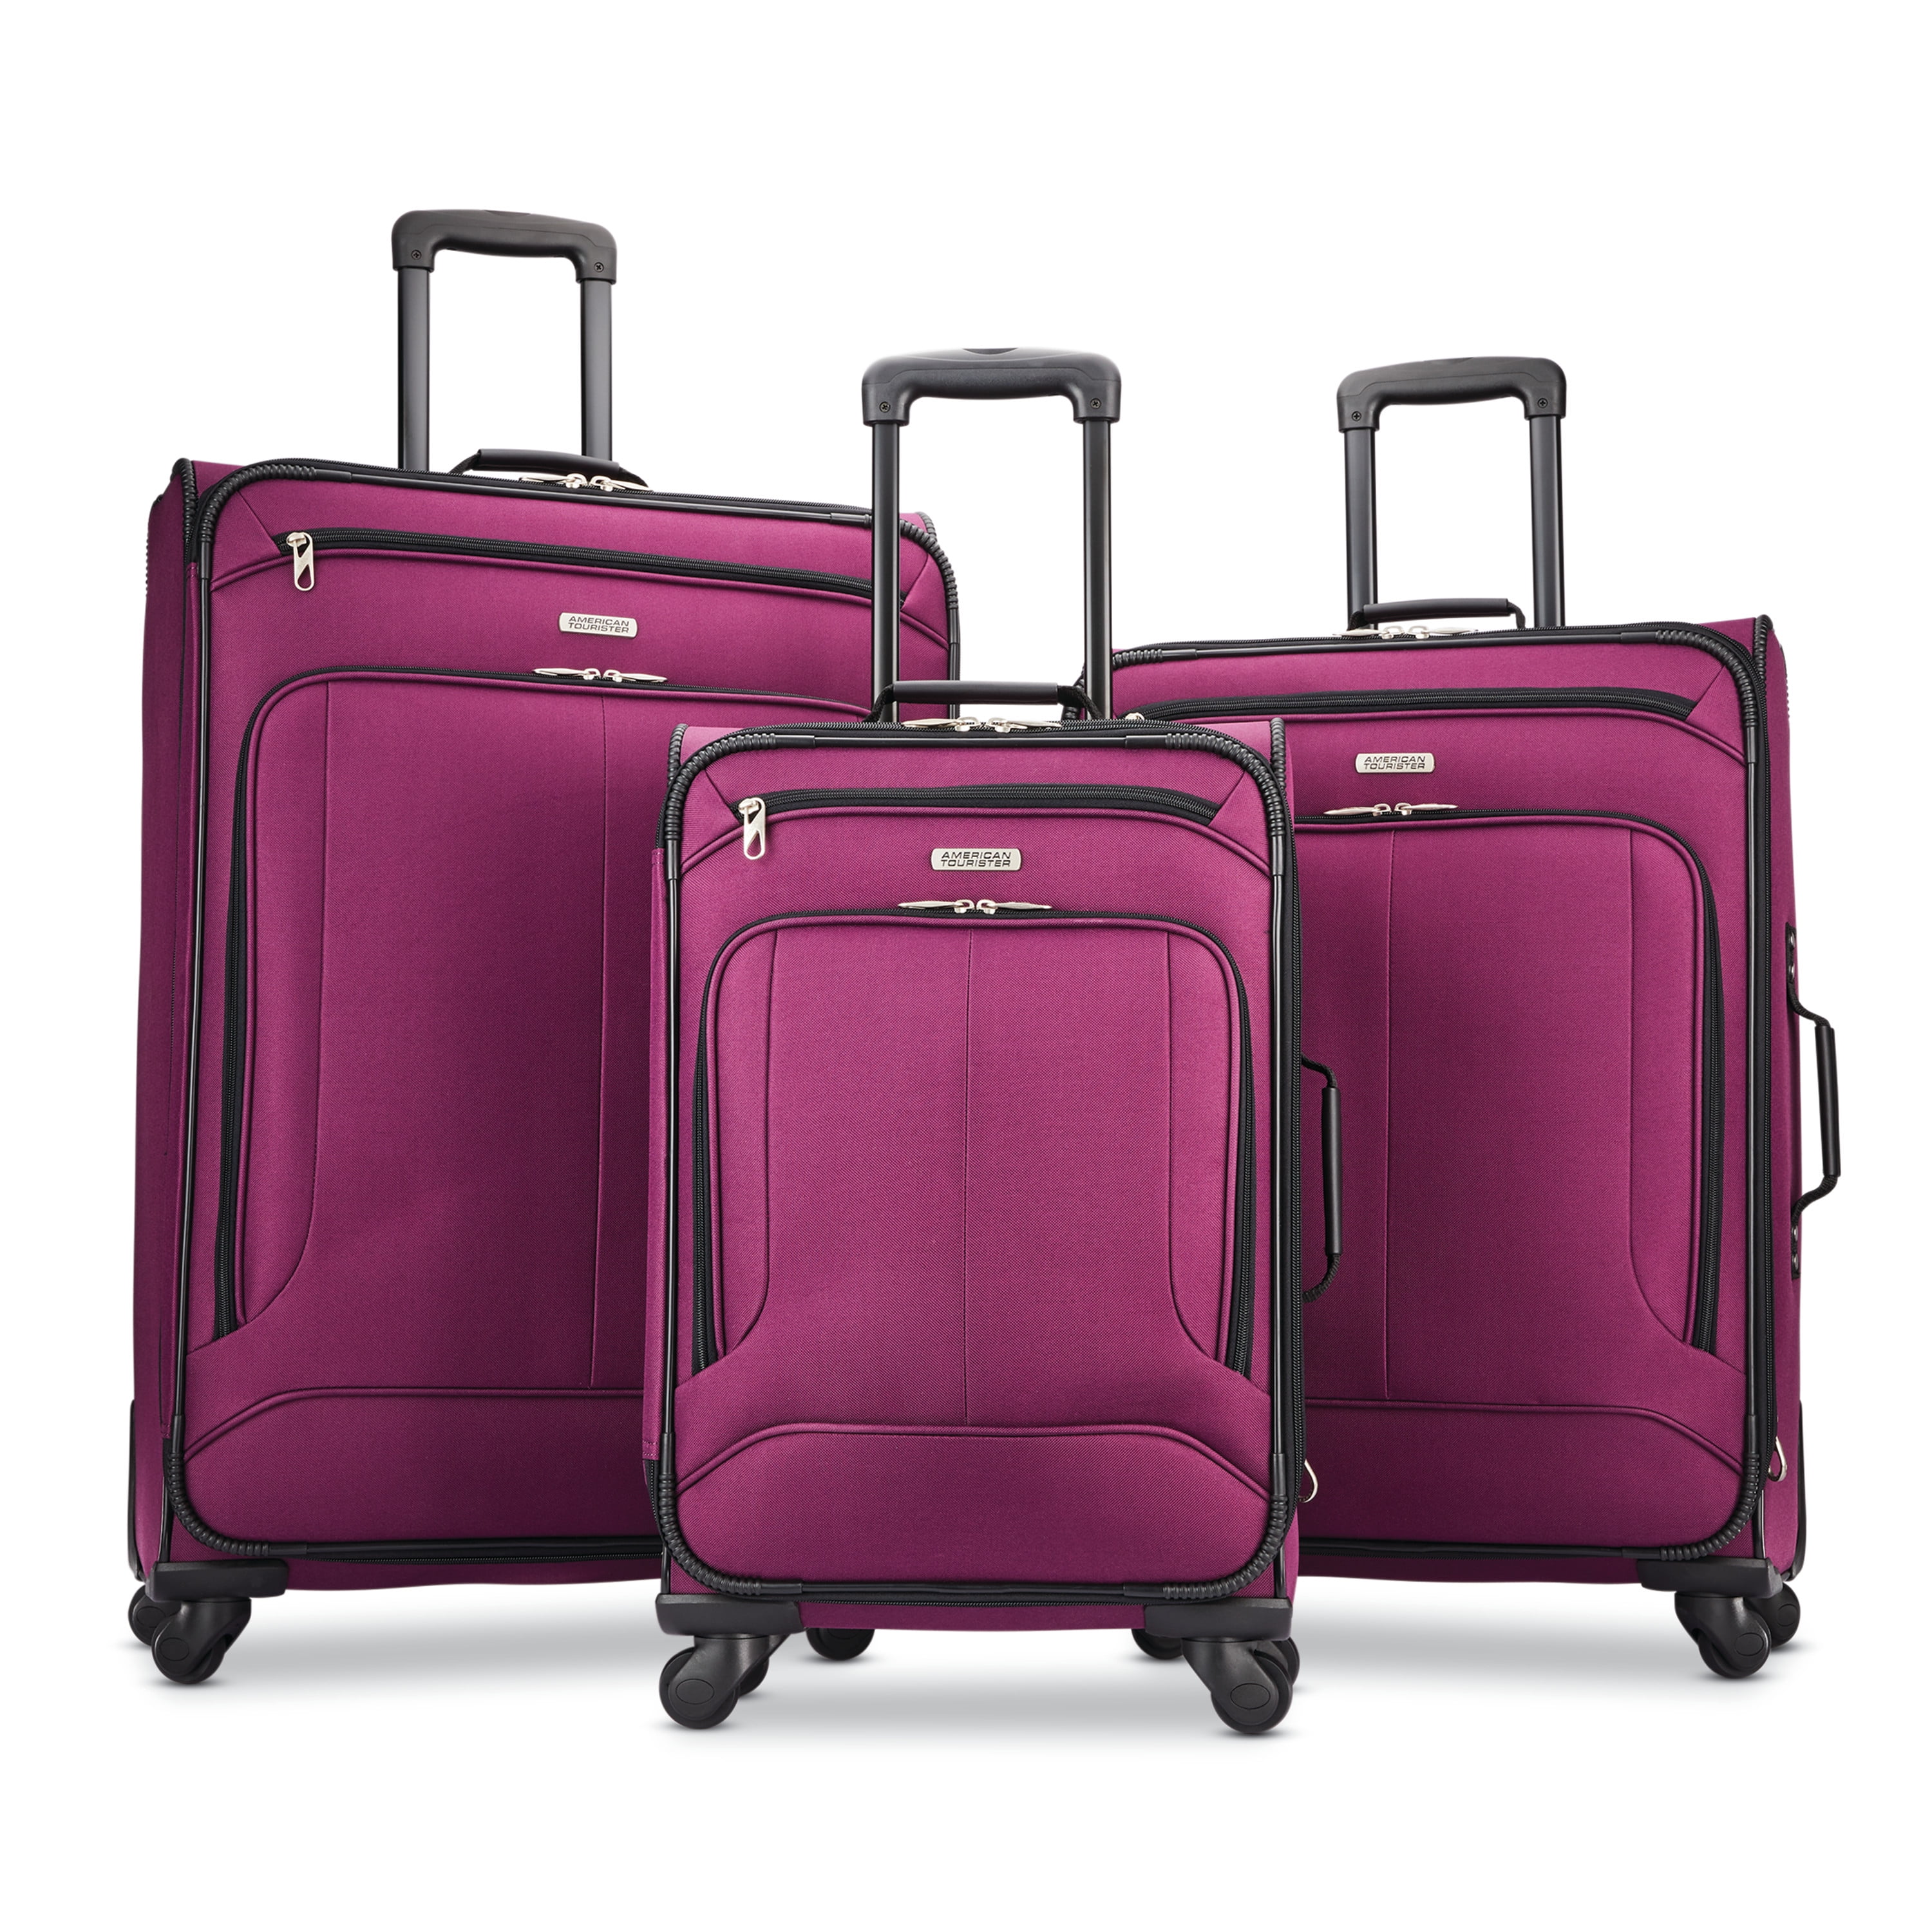 American Tourister Pop Max 3-Piece Softside Spinner Travel Set, 21-inch ...